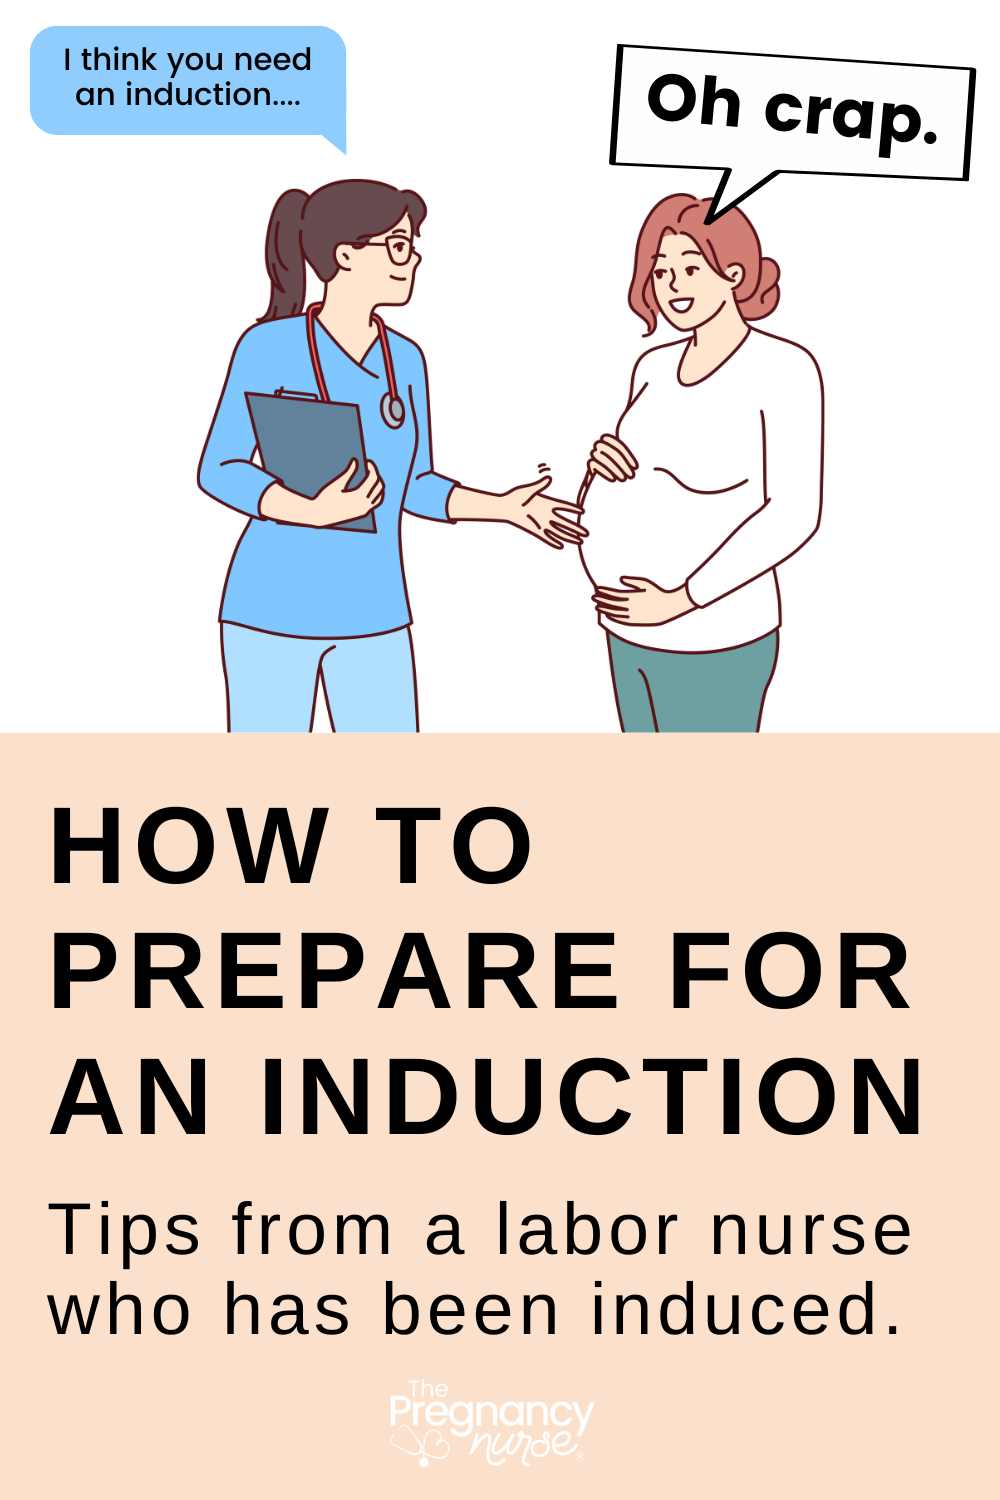 pregnant woman and provider - provider says I think we need to induce you, pregnant woman says "oh crap" // how to prepare for an induction - tips from a labor nurse who has been induced.